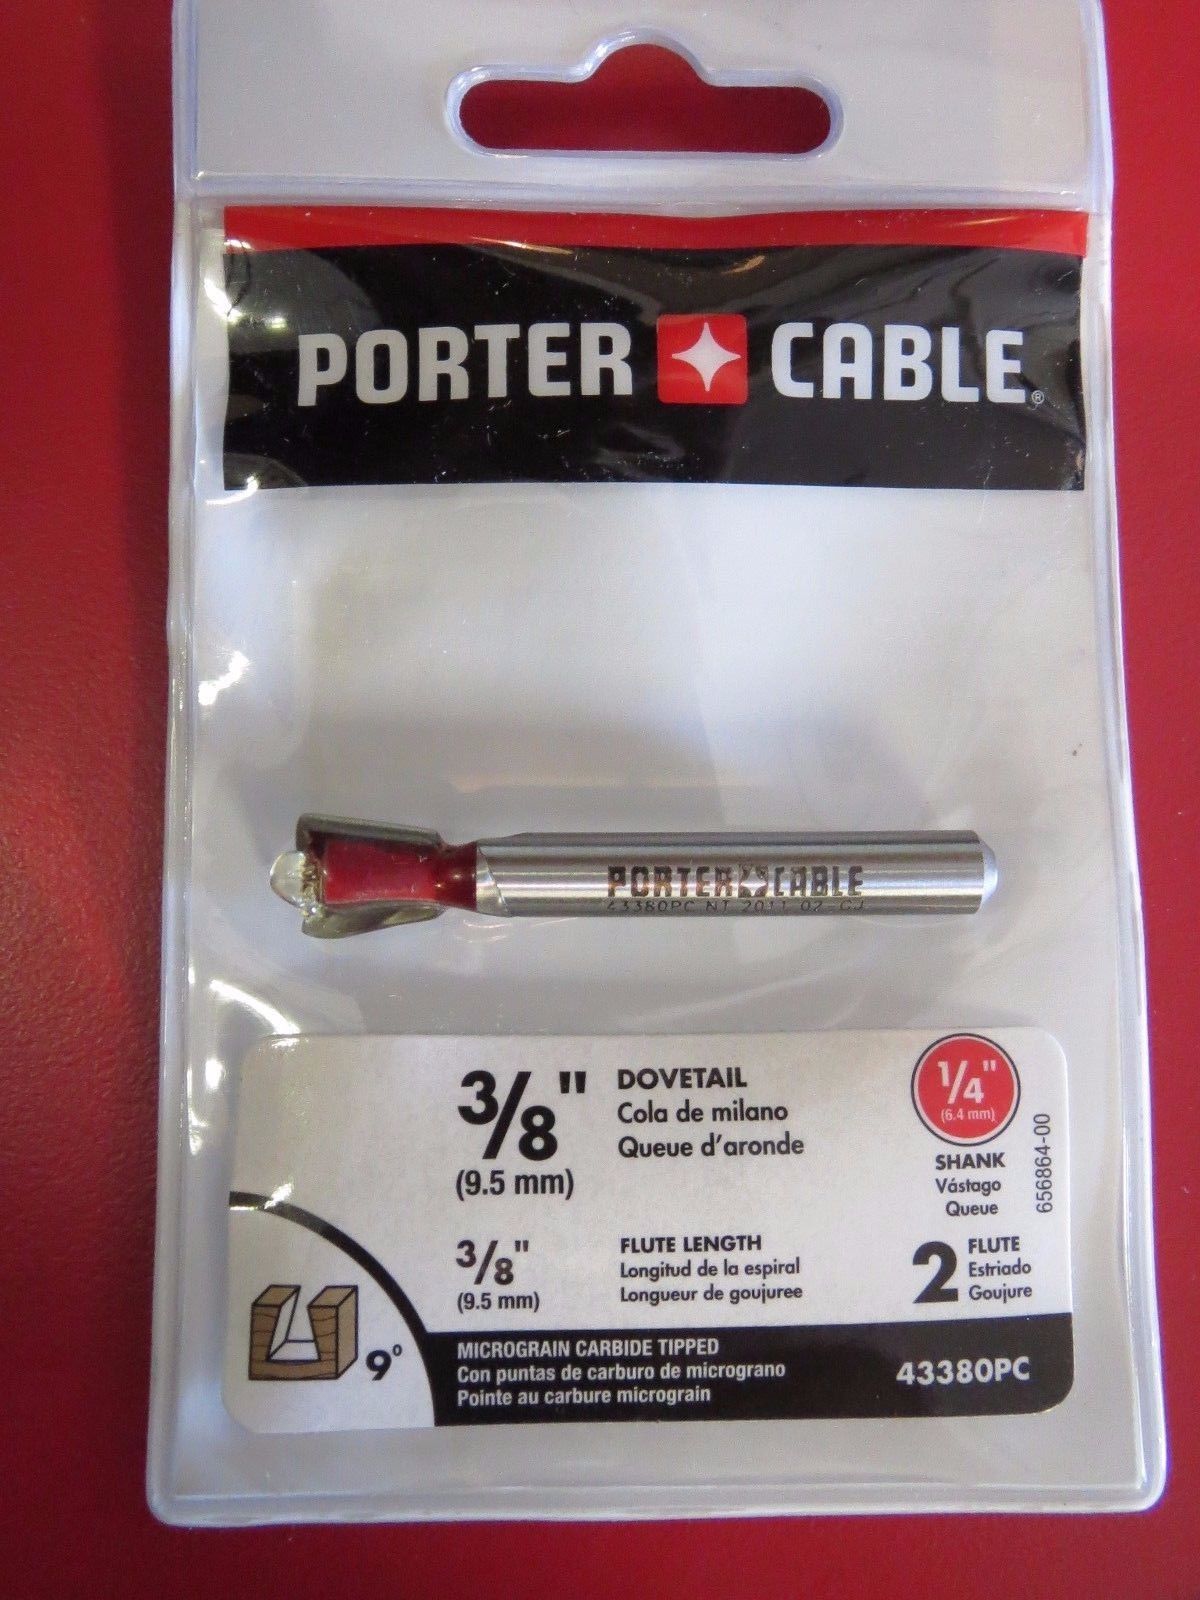 Porter Cable 43380PC Dovetail 3/8" Router Bit 1/4 Shank